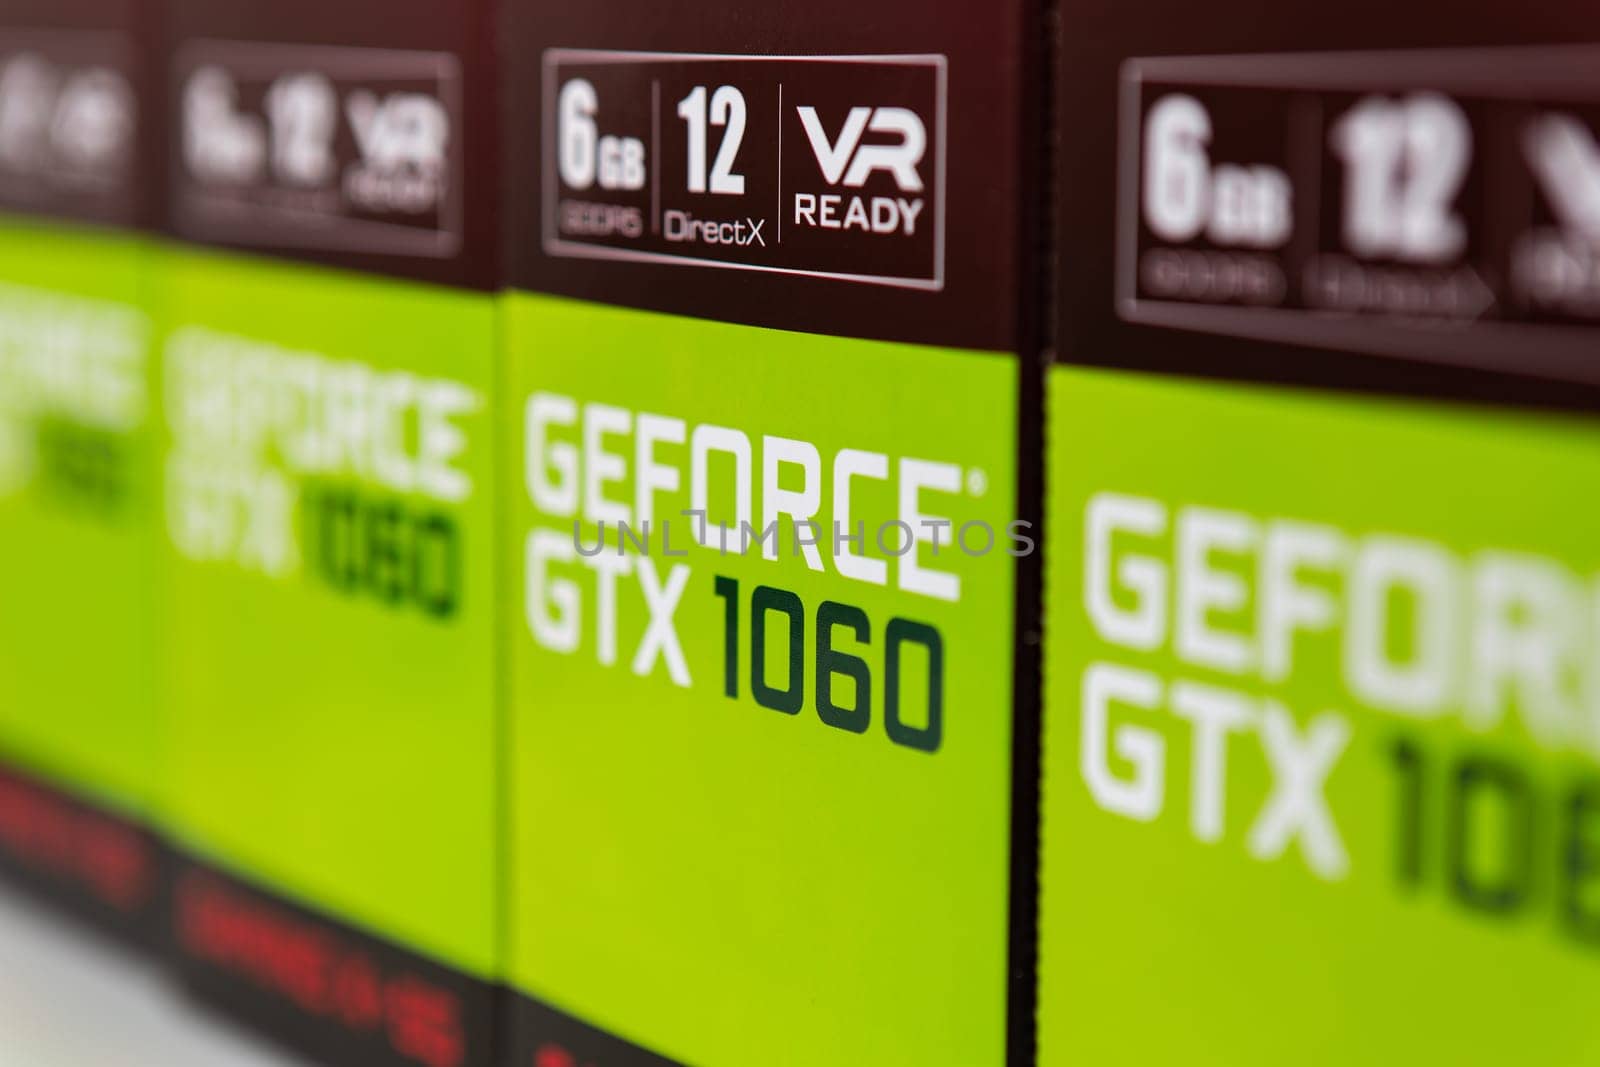 Kyiv, Ukraine - 27 January 2022: Four packages in a row Nvidia Geforce GTX 1060 graphics card. Components for a personal computer - boxes MSI Gaming X video cards on a store counter. Selective focus